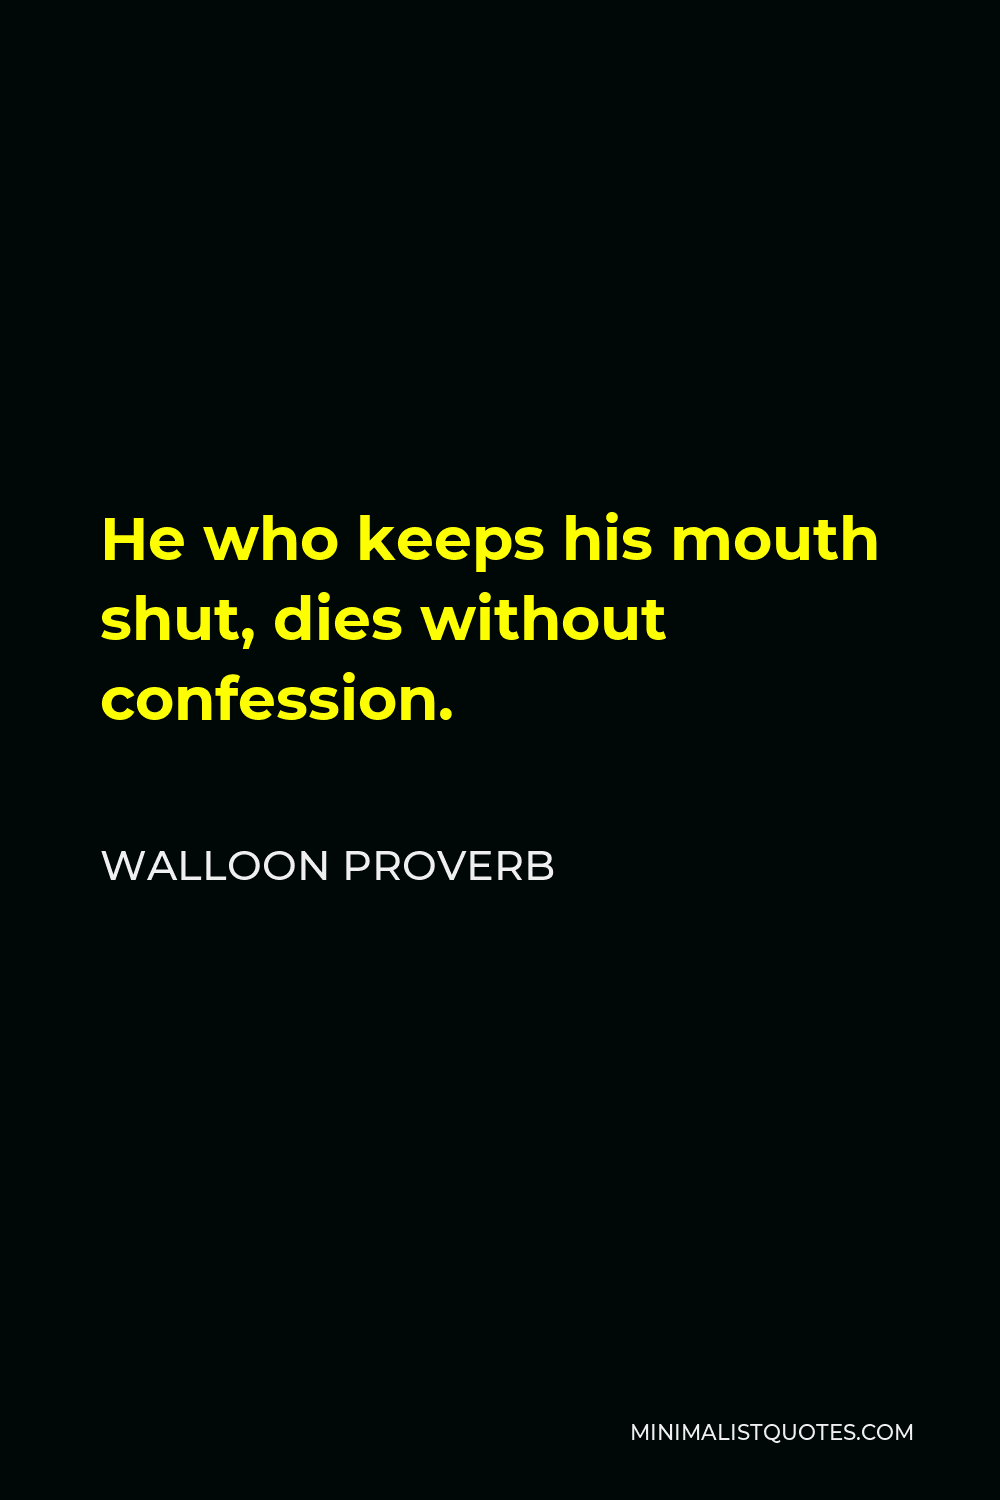 Walloon Proverb Quote - He who keeps his mouth shut, dies without confession.